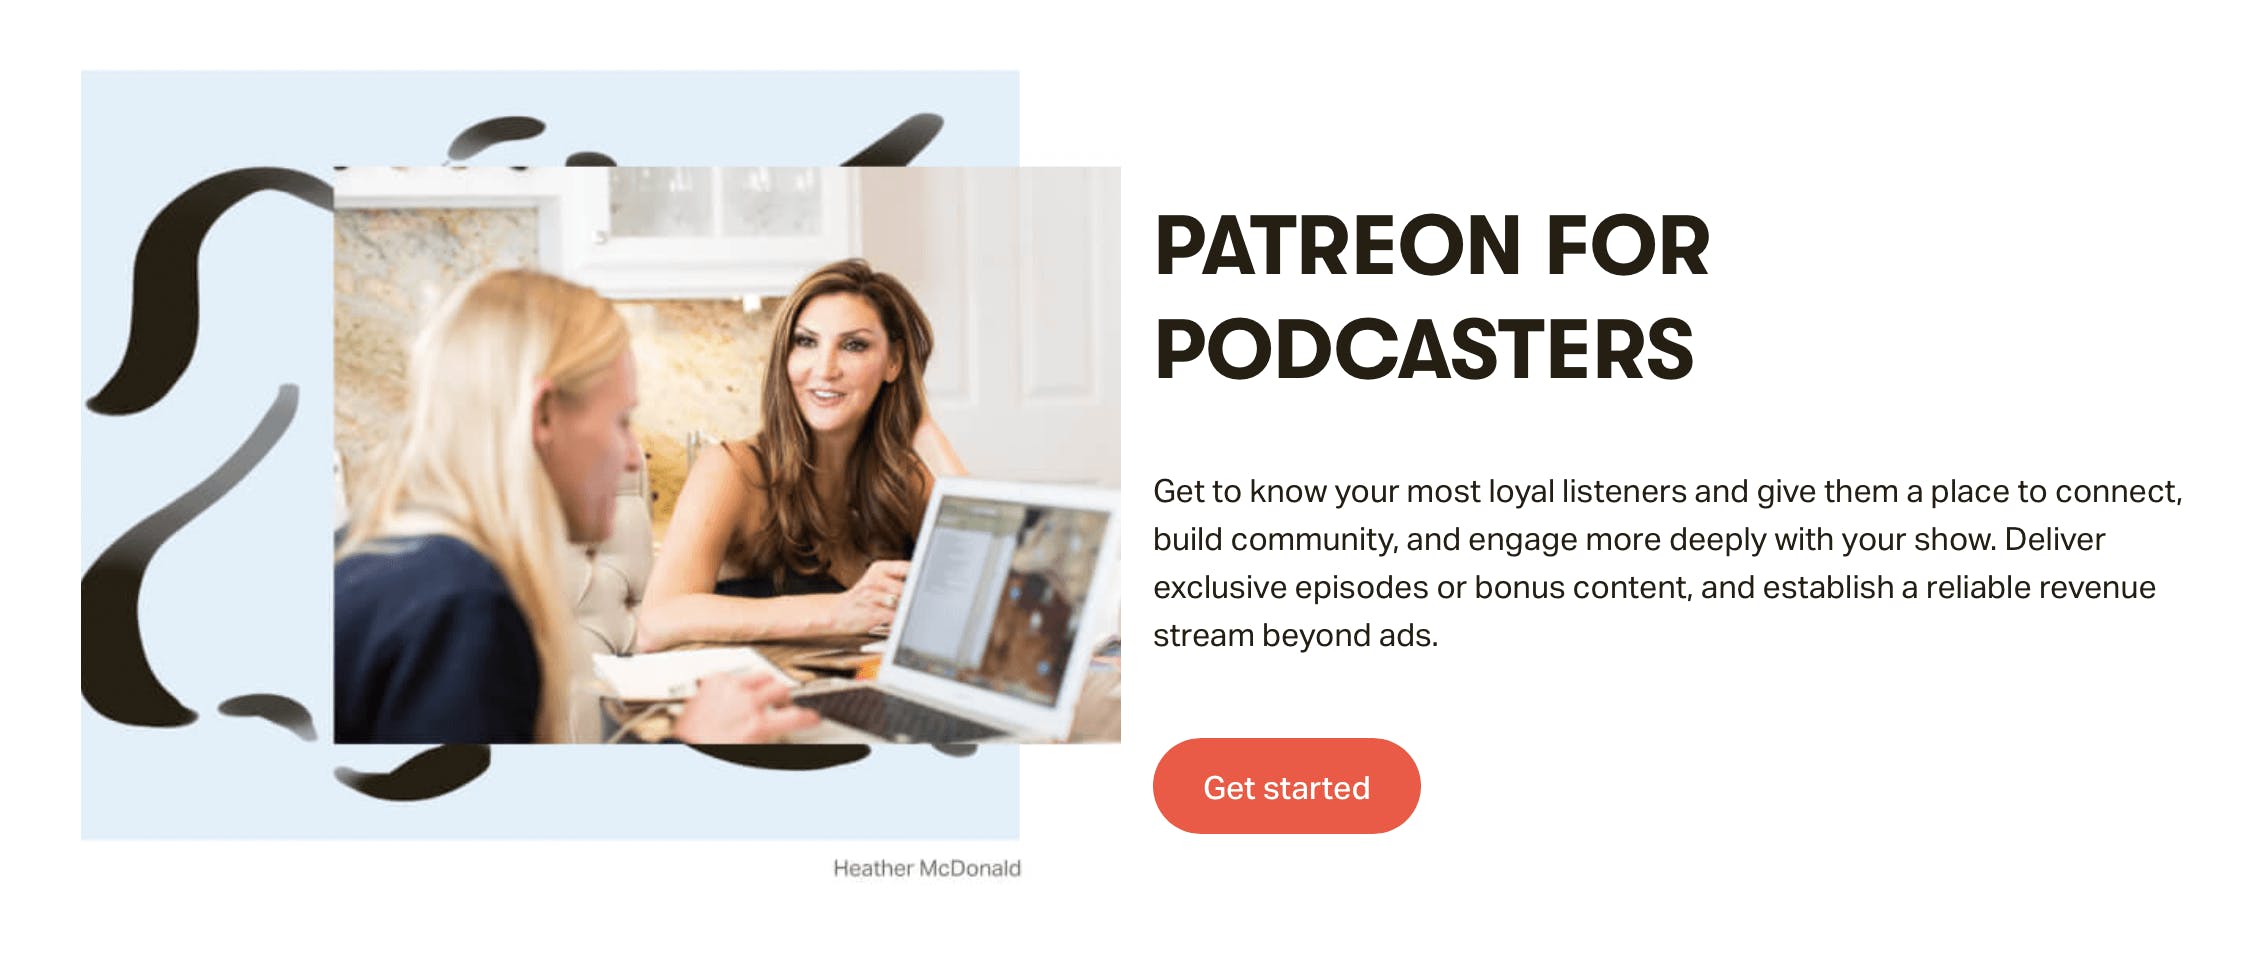 Patreon for Podcasters